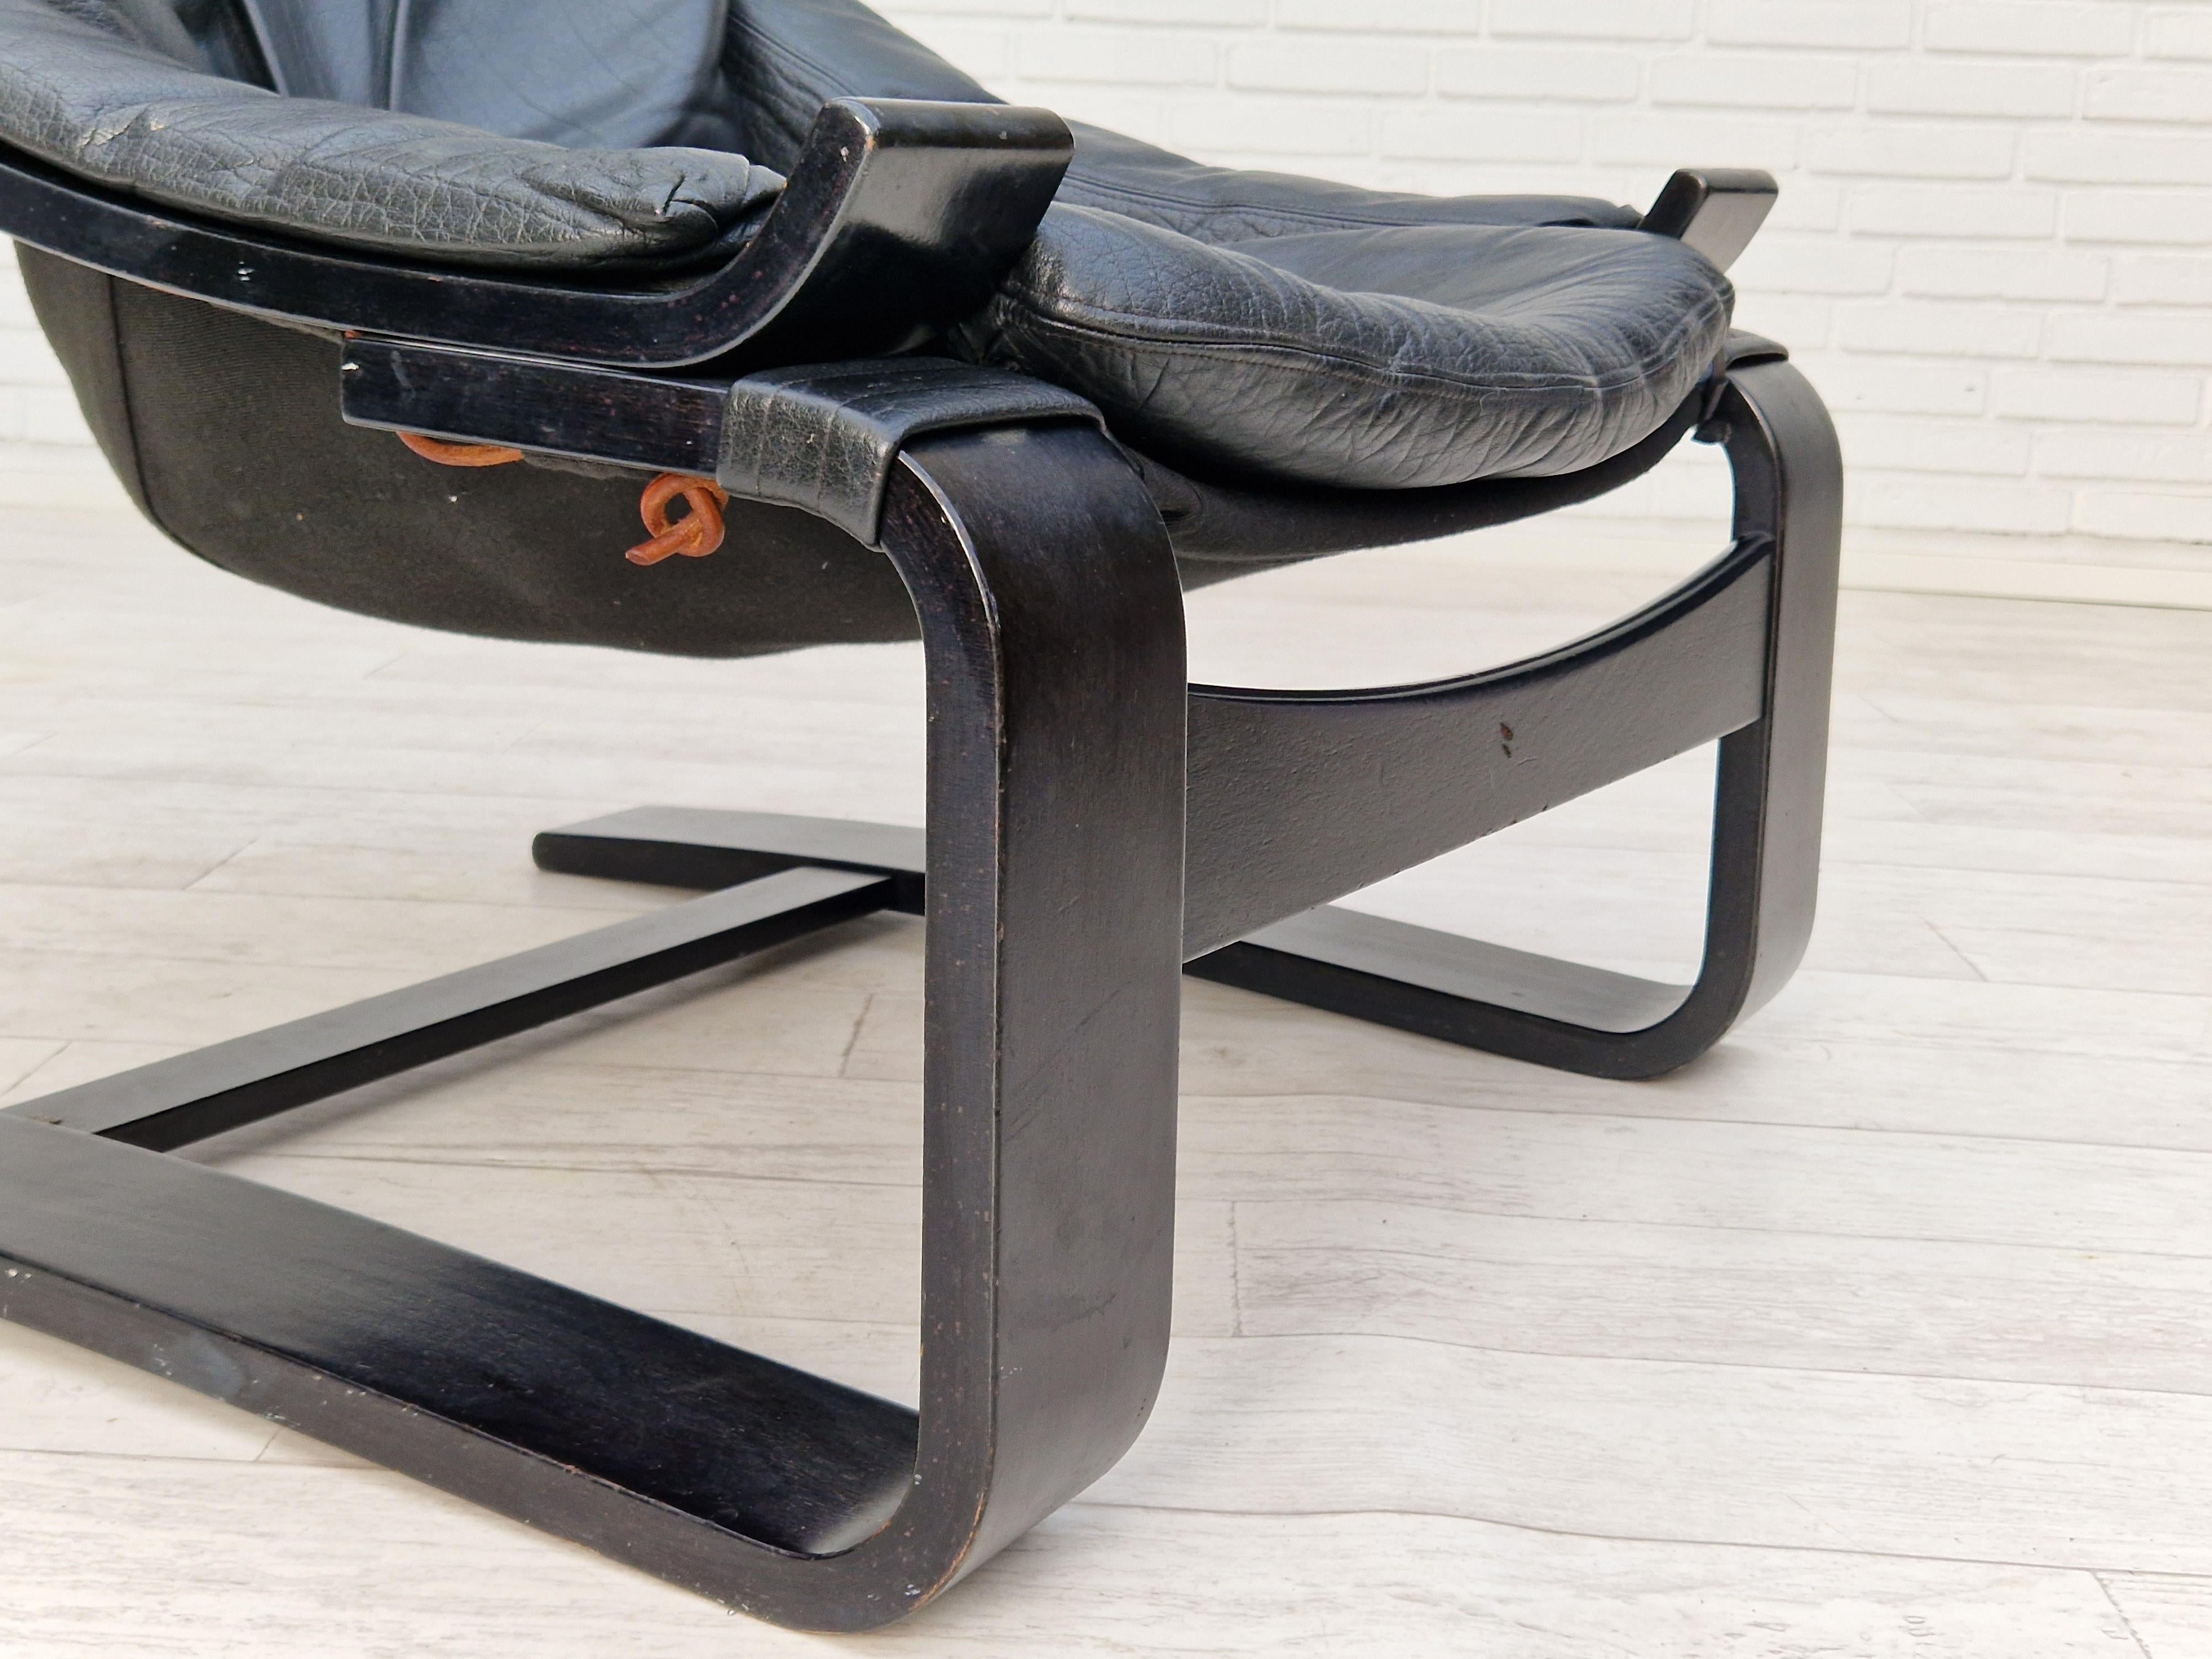 1970s, Swedish Design by Ake Fribyter for Nelo, Set of Two Kroken Lounge Chair For Sale 8